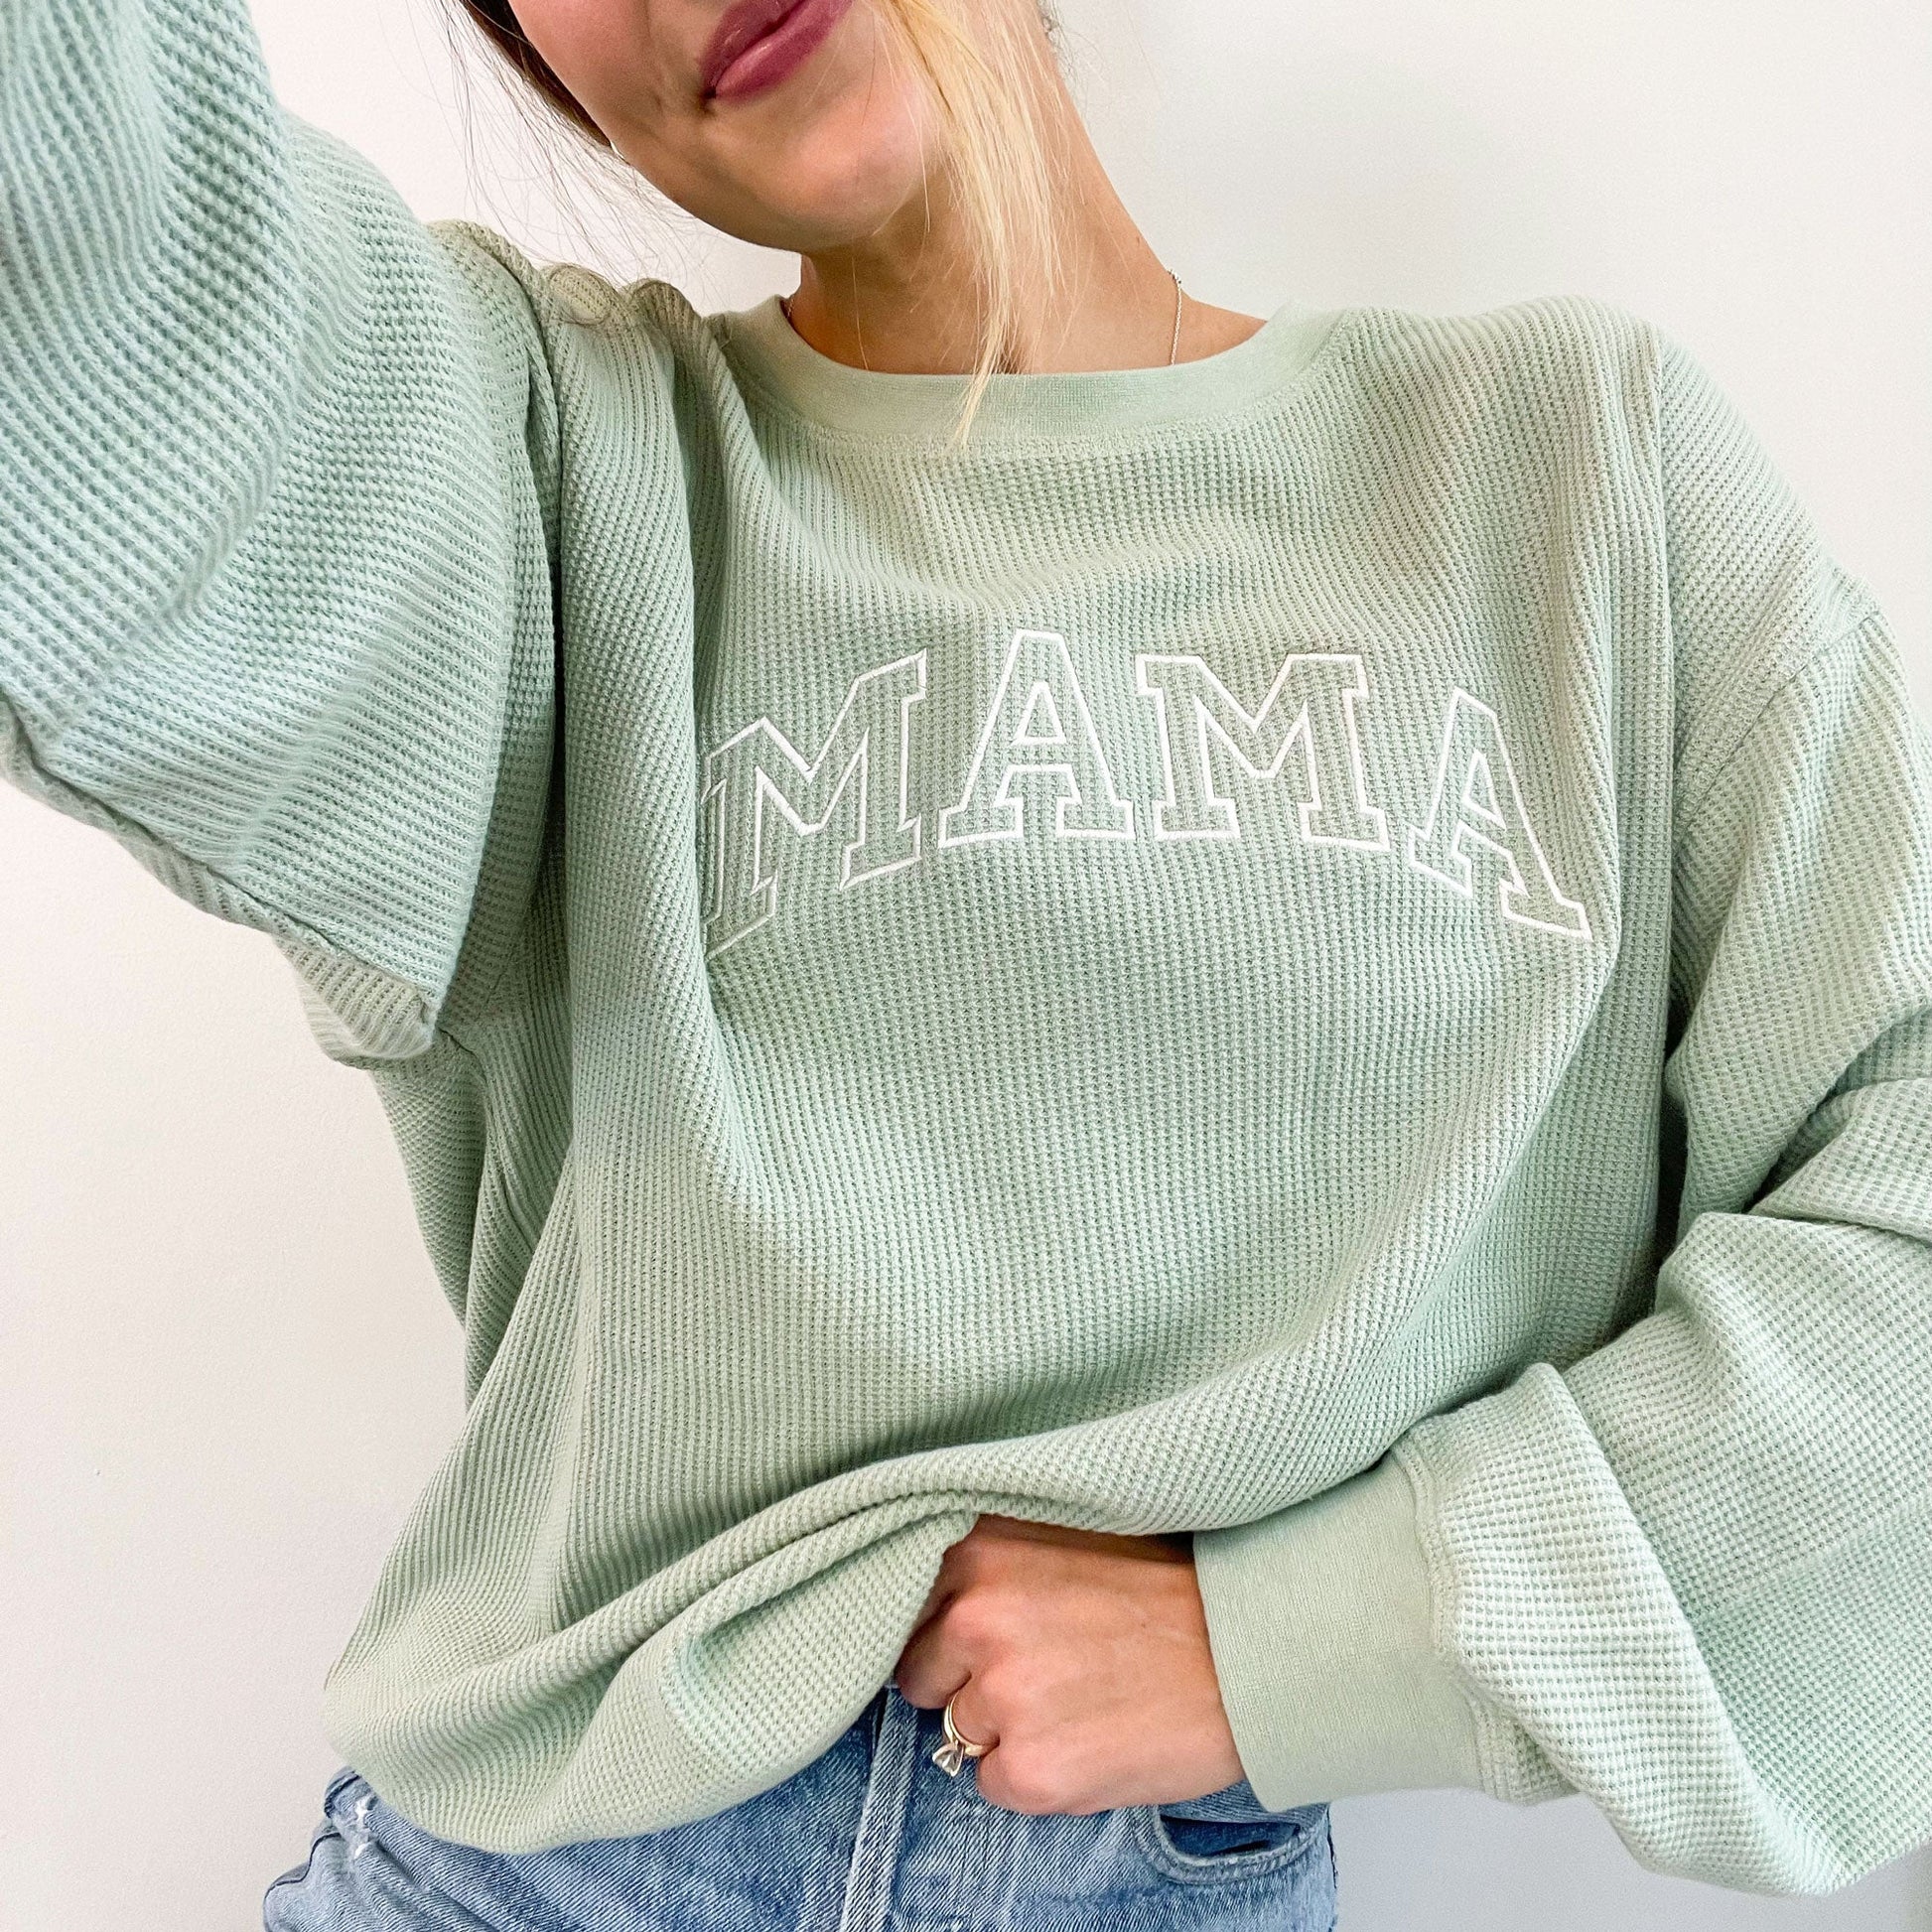 woman wearing oversized sage green waffle knit crewneck sweatshirt with mama embroidered in large block letters across the chest